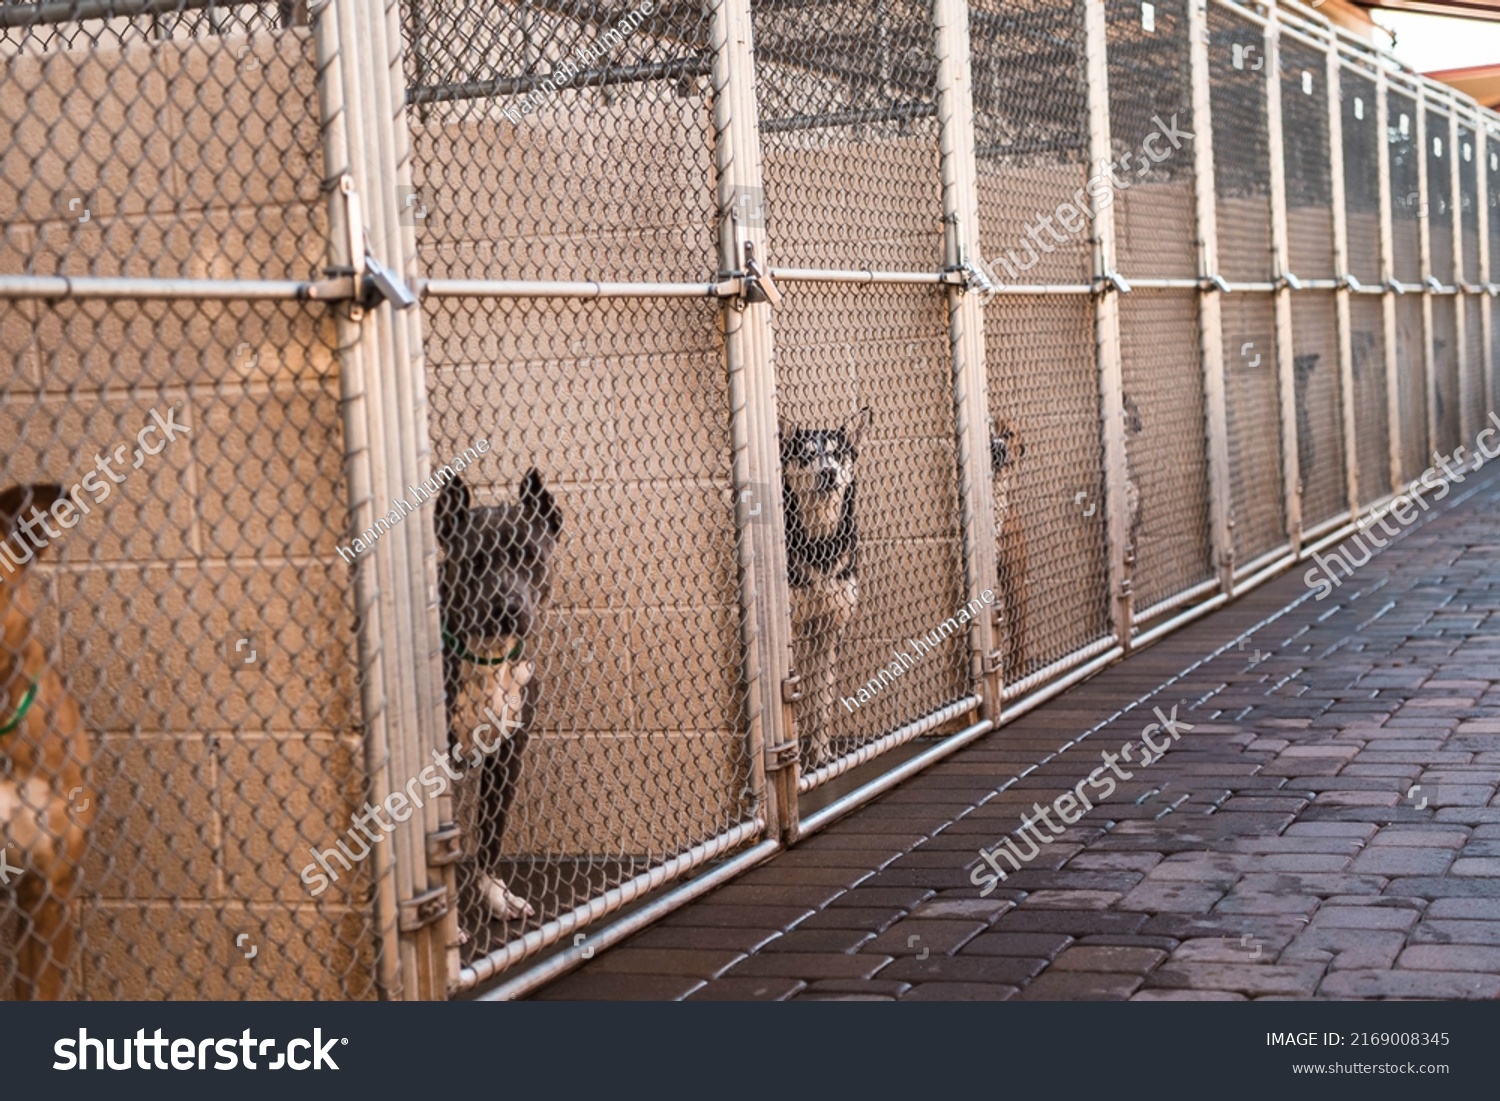 Many Multiple Dogs in Animal Shelter Kennels Cages Overcrowded Rescue Shelter Adoptable Dogs Waiting to be Rescued or Adopted Watching inside Looking at Camera Begging Pleading for Help #2169008345